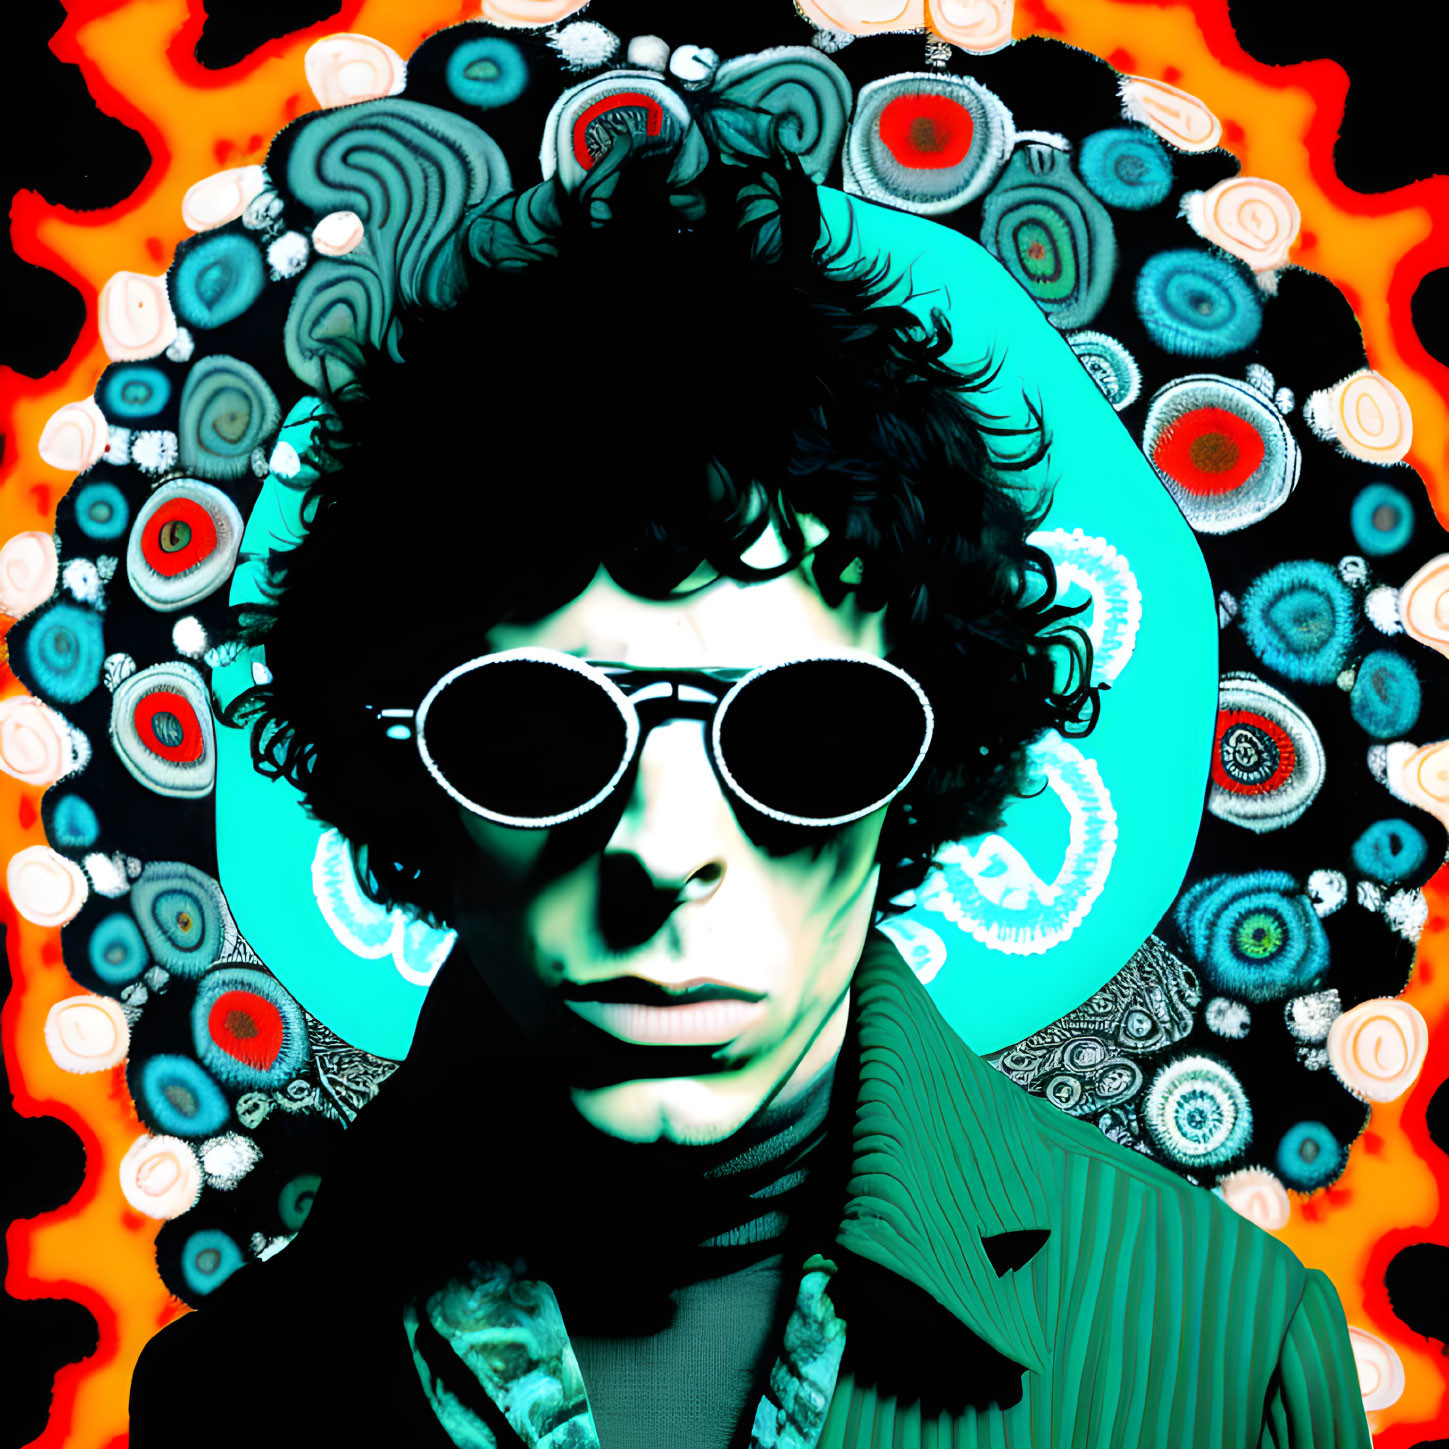 Colorful portrait of person with curly hair & sunglasses in vibrant psychedelic background